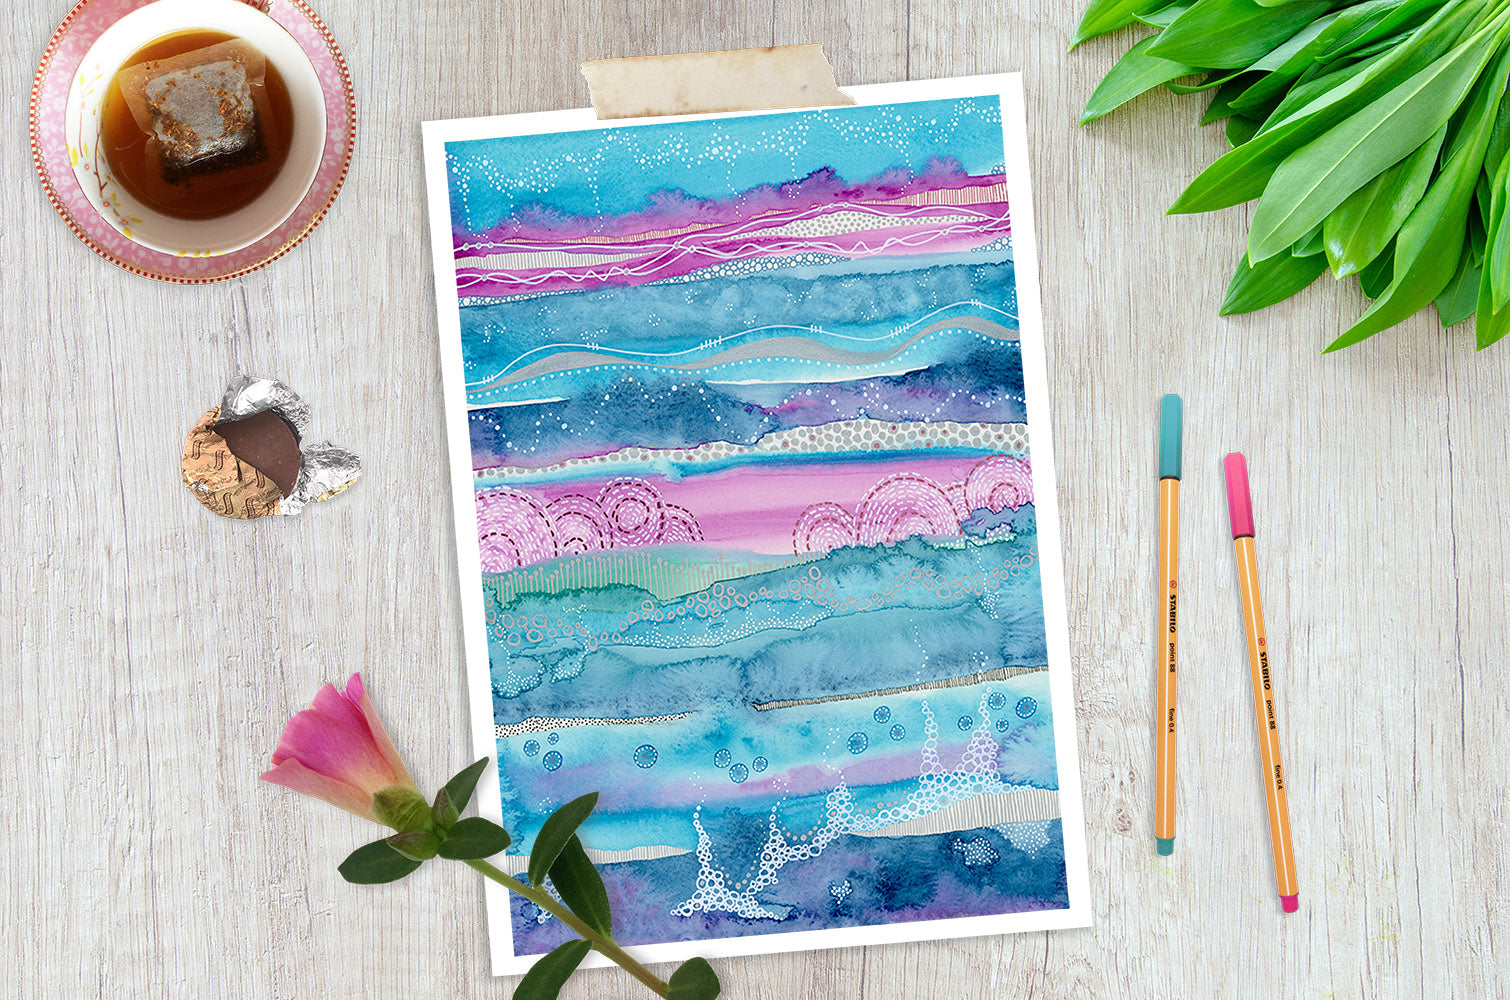 This image contains a watercolor abstract landscape painting in blue and pink by joanne grant art.  The painting is on a white wood table with a cup of tea, a chocolate, pink flower, teal and pink pens and a green plant surrounding it.